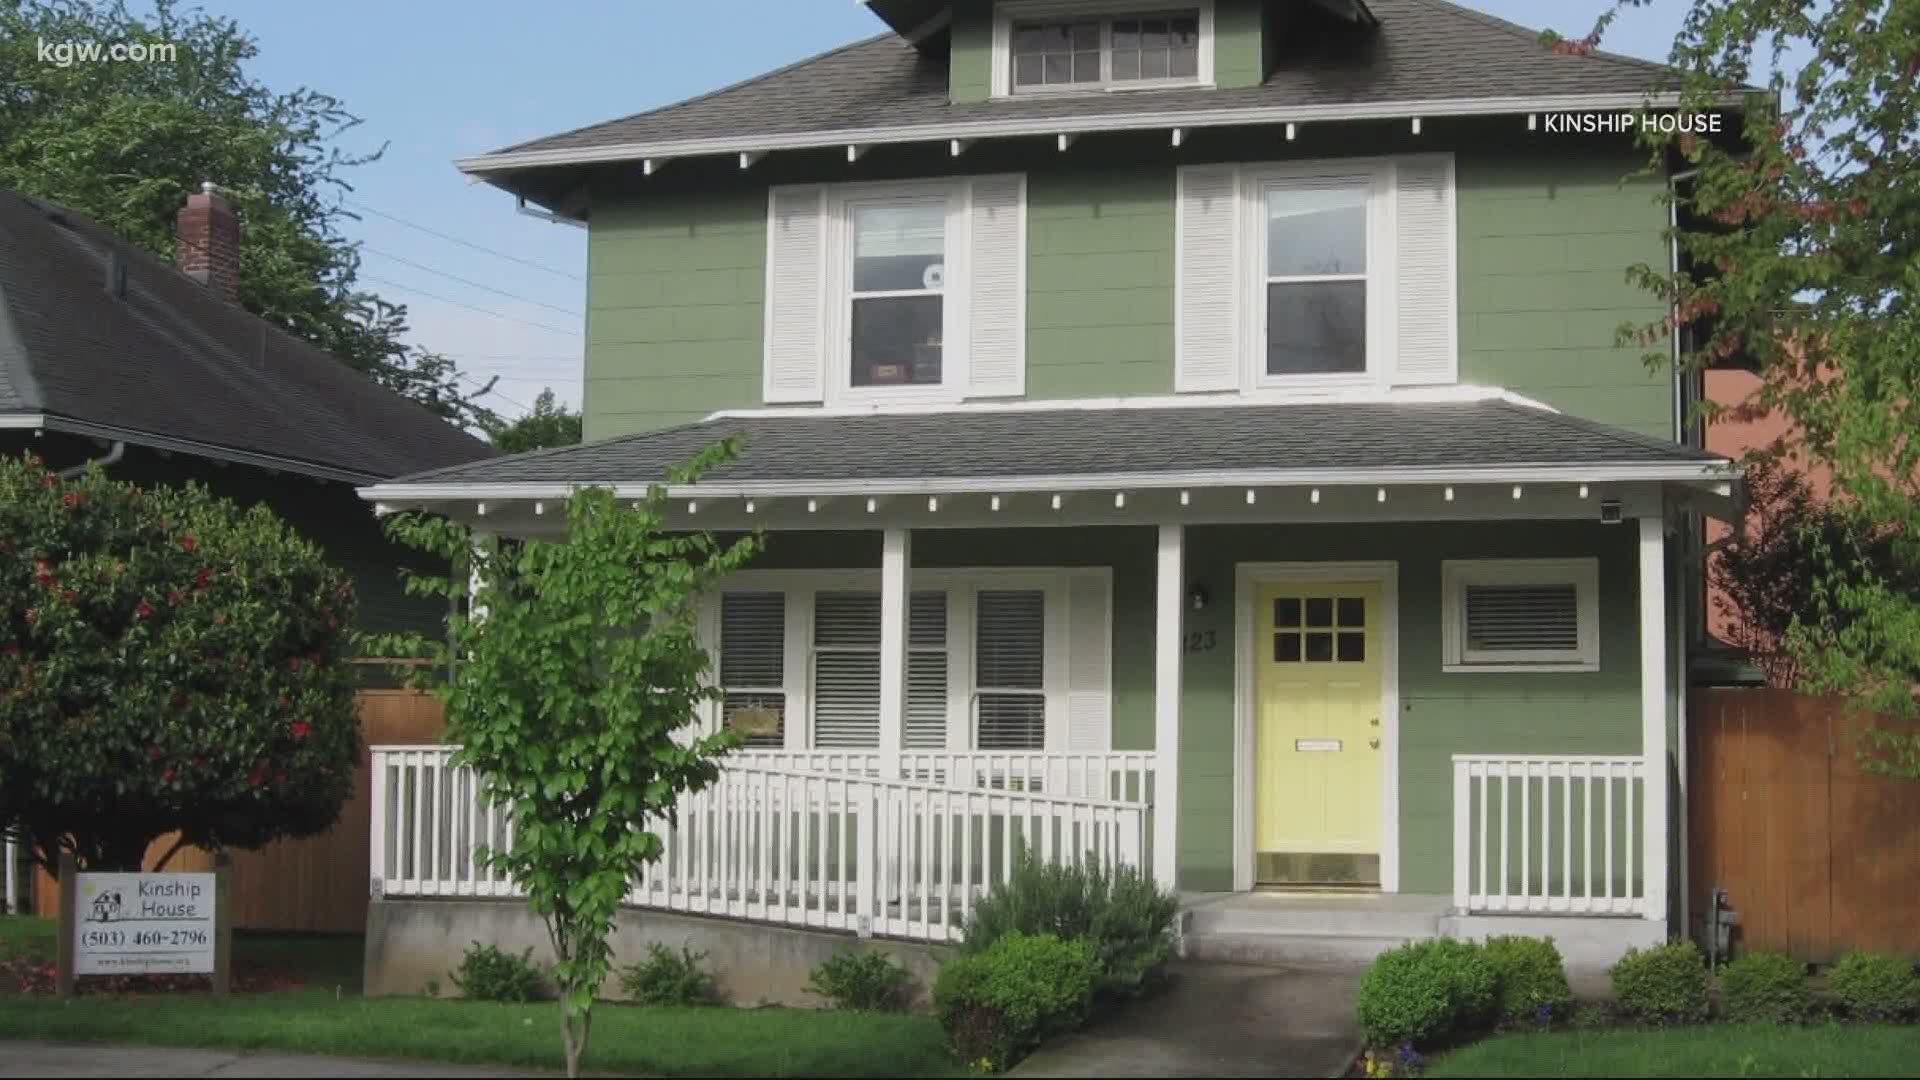 The Kinship House in Portland provides therapy for foster kids. A donation drive could help them safely reopen.